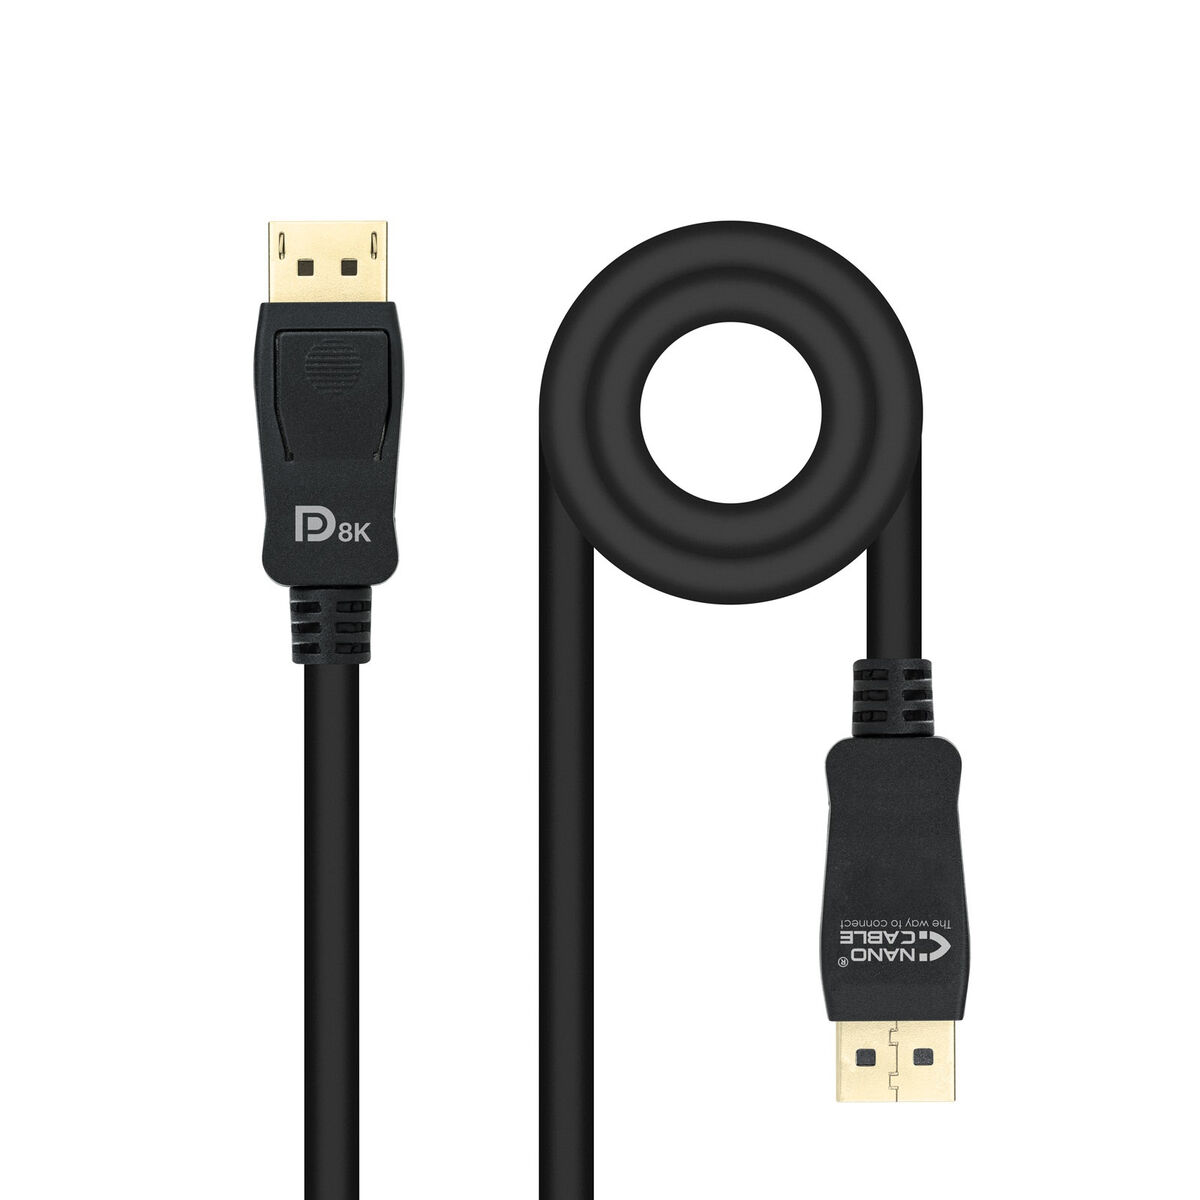 Cable DisplayPort NANOCABLE HDR 8K Ultra HD Negro